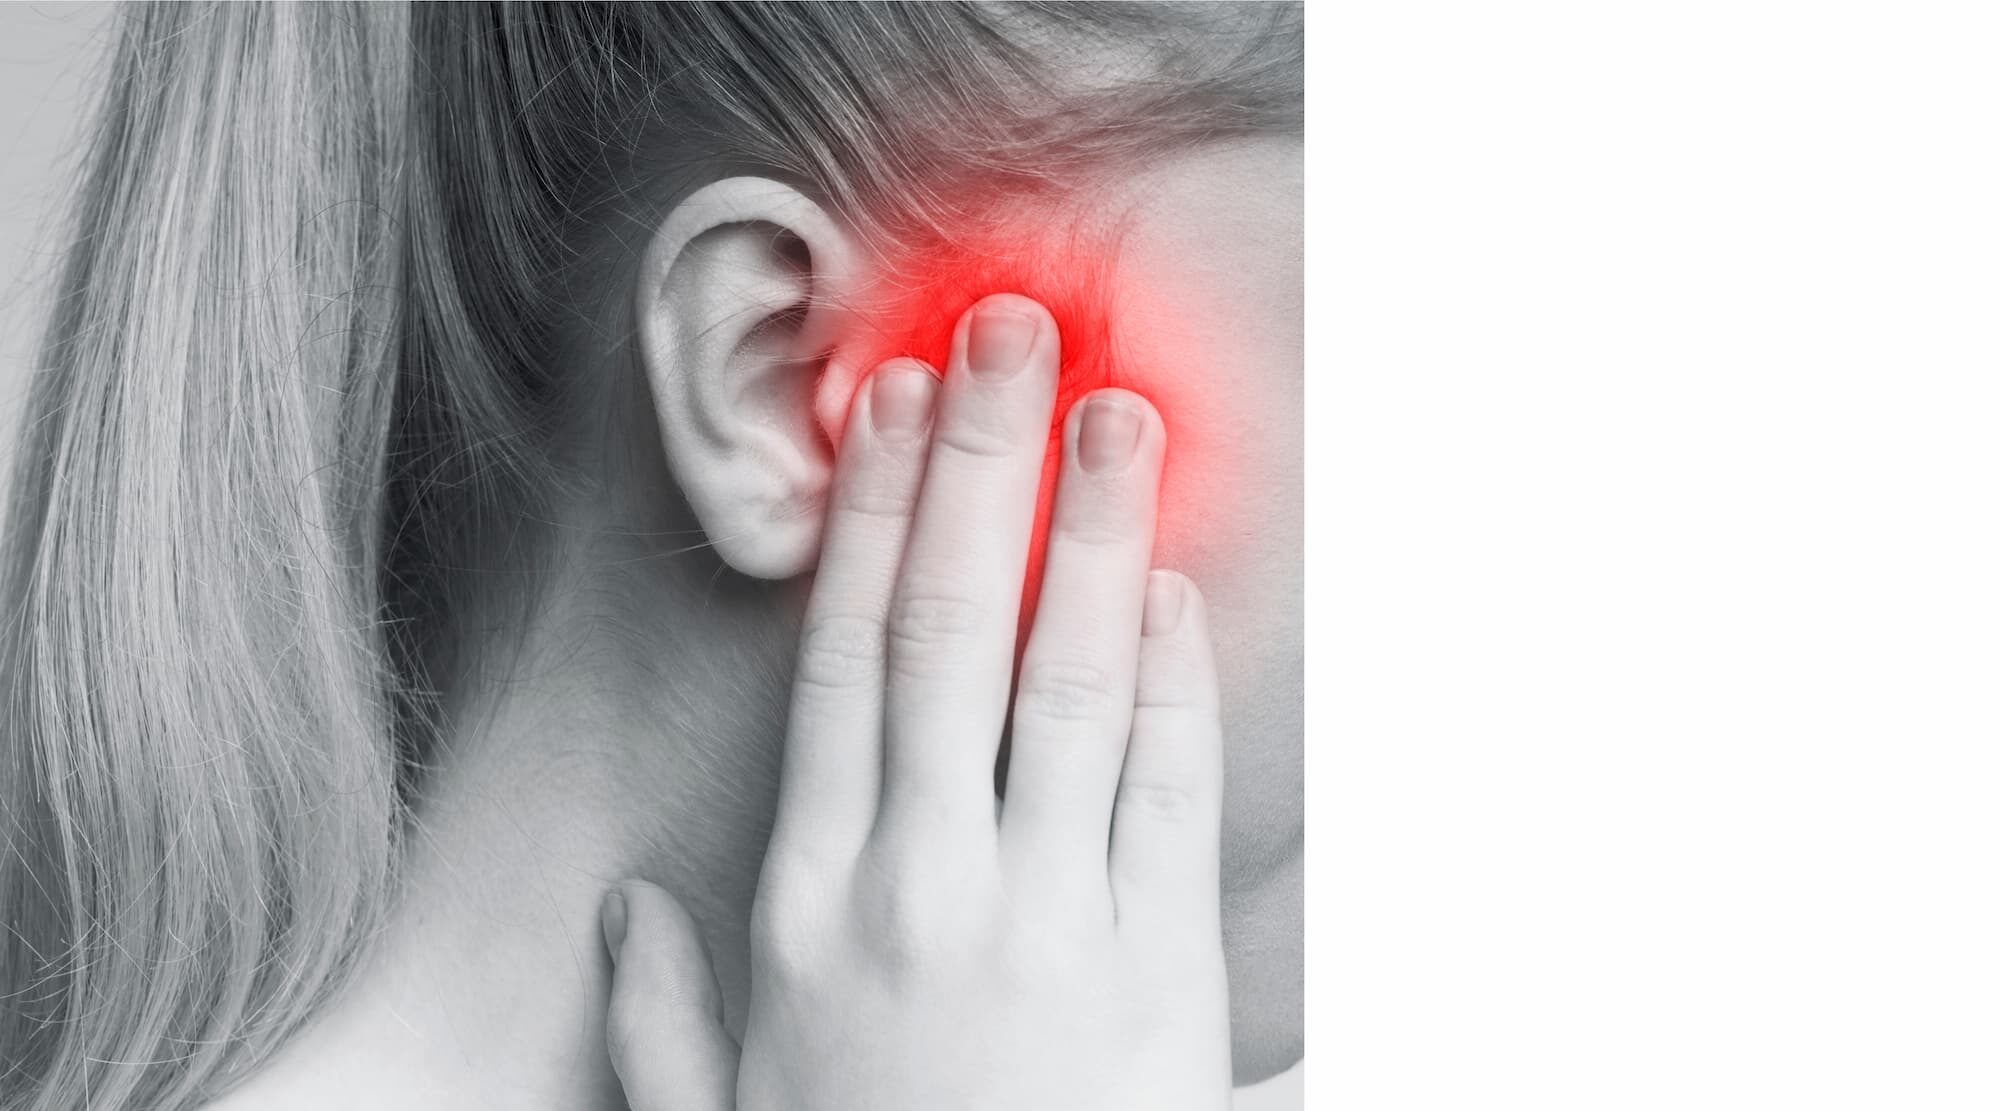 Memorial Hearing Treatment for Hyperacusis and Misophonia